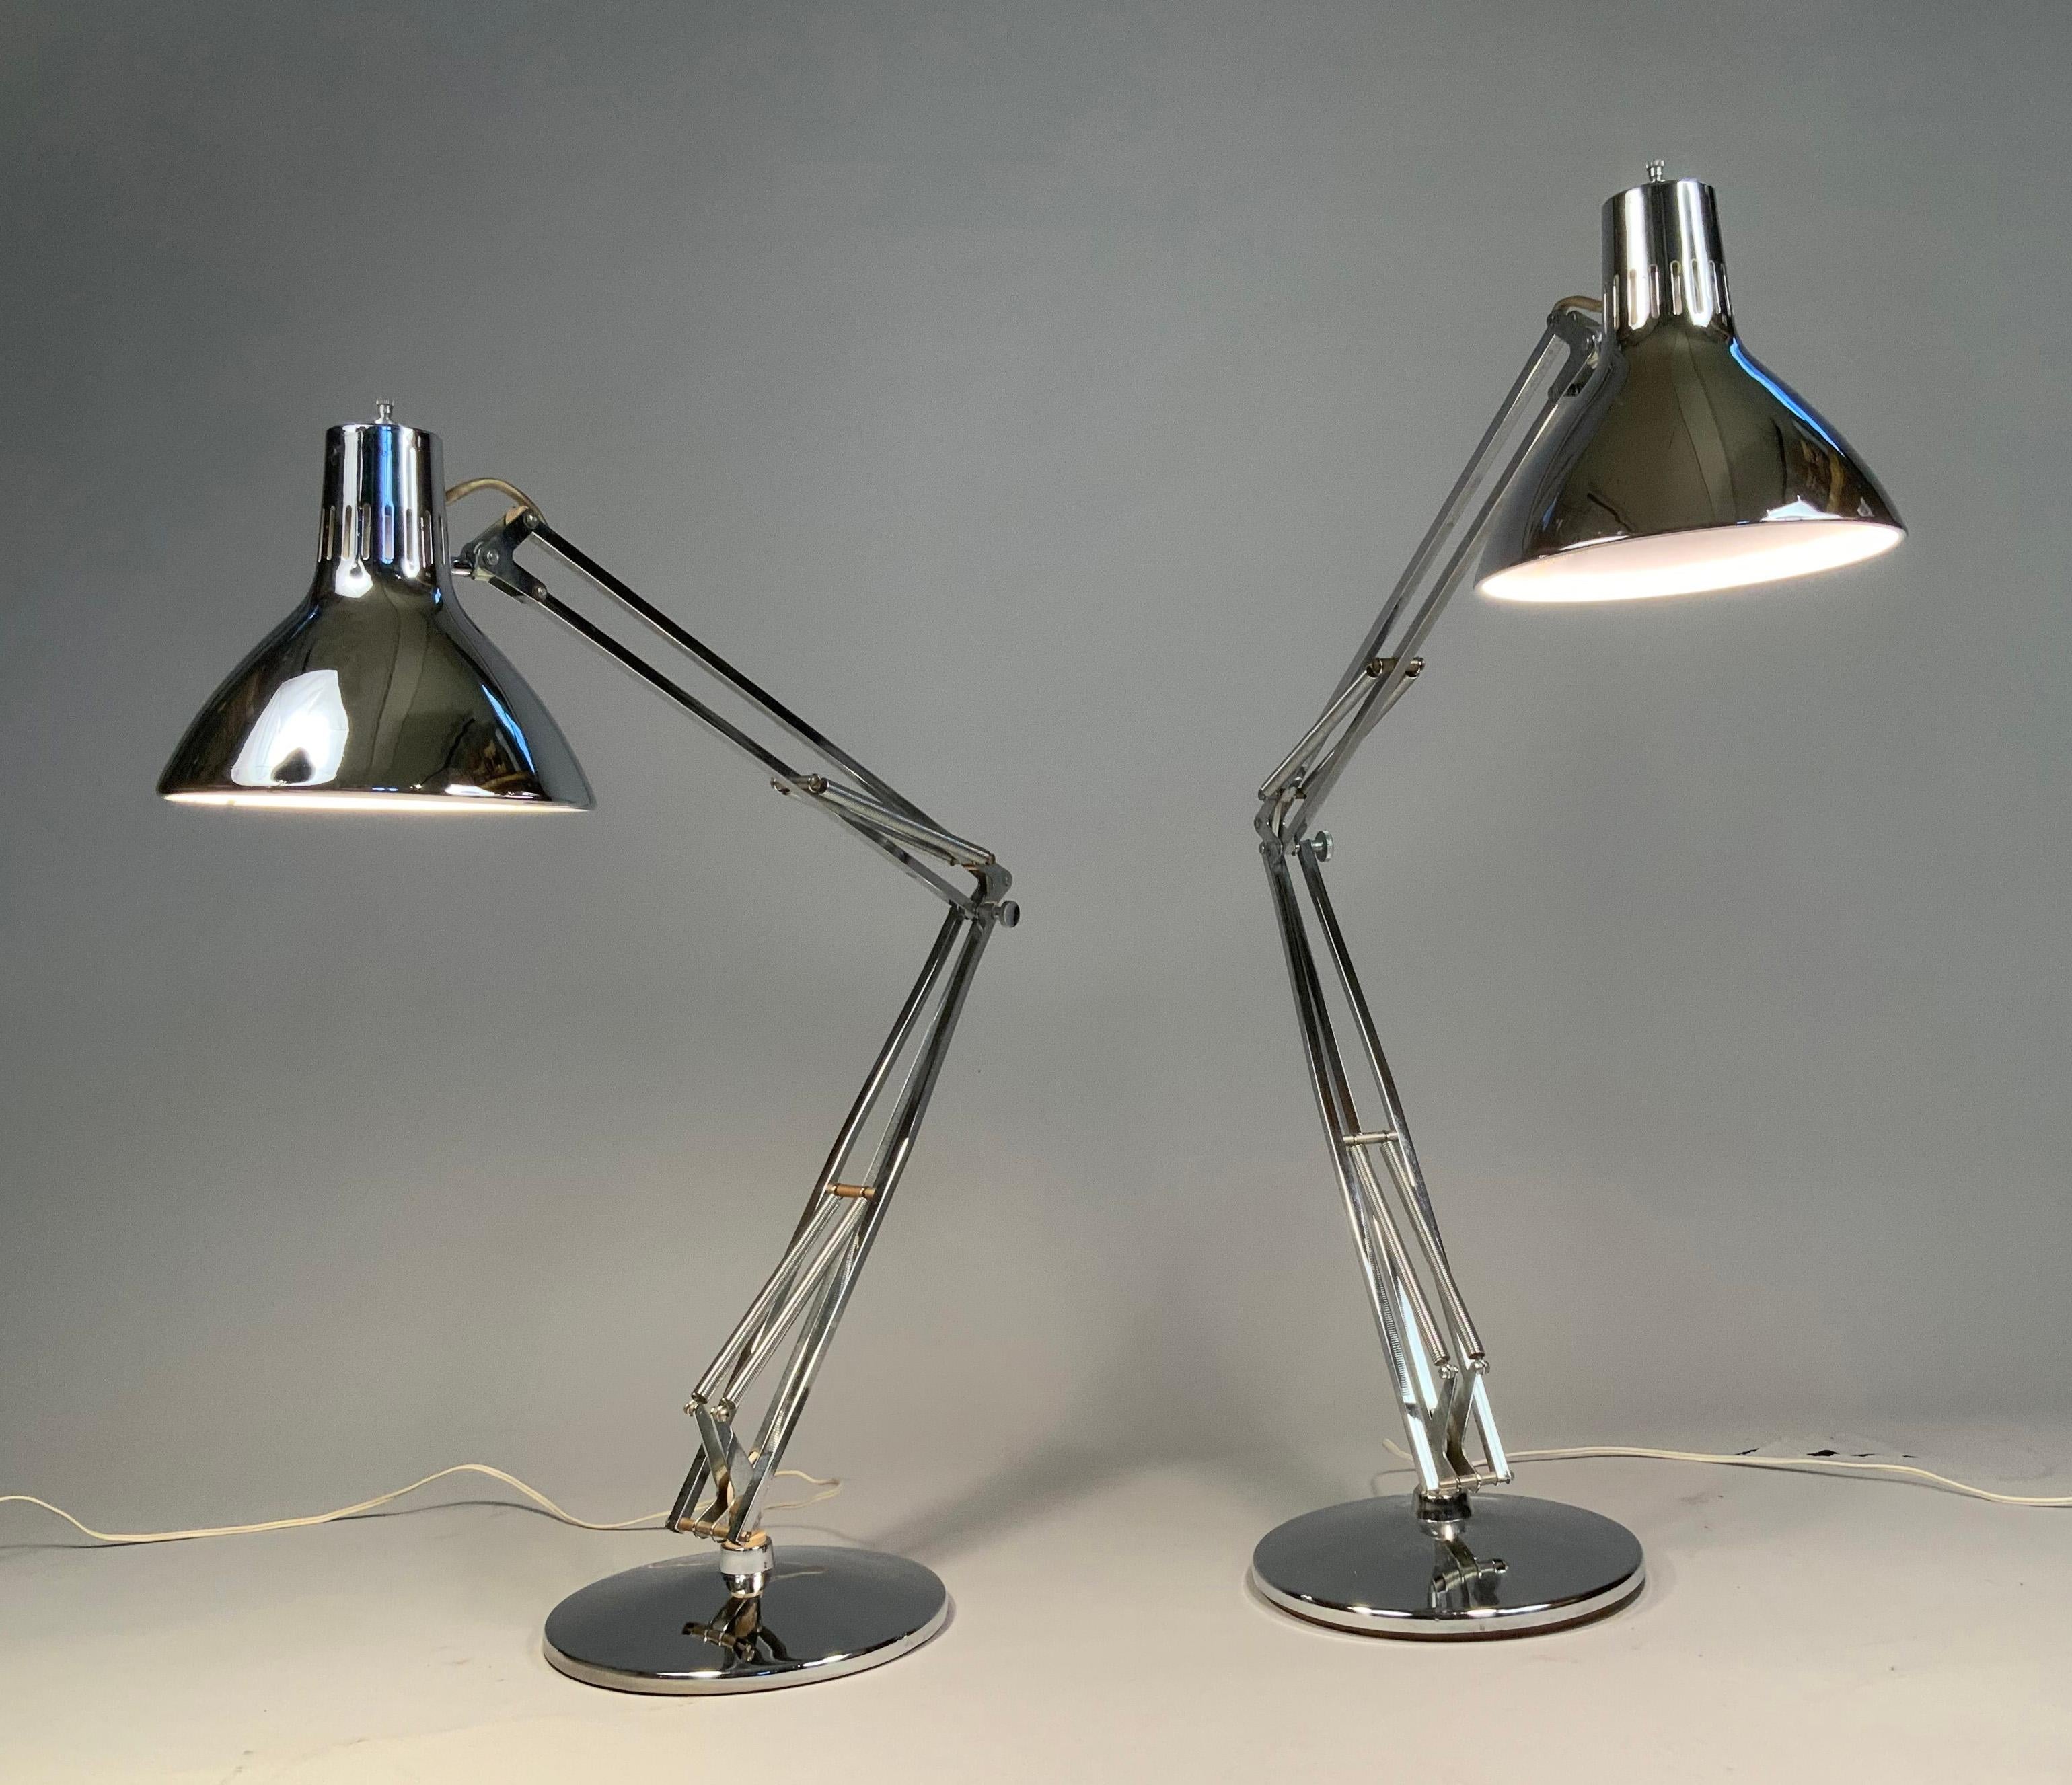 A very handsome matched pair of 1960's table lamps by Luxo. the L1 is the most famous and original self-balancing articulated table lamp. the most expensive version of this lamp is the one in polished chrome. 

The L1 lamp was designed by Jacob